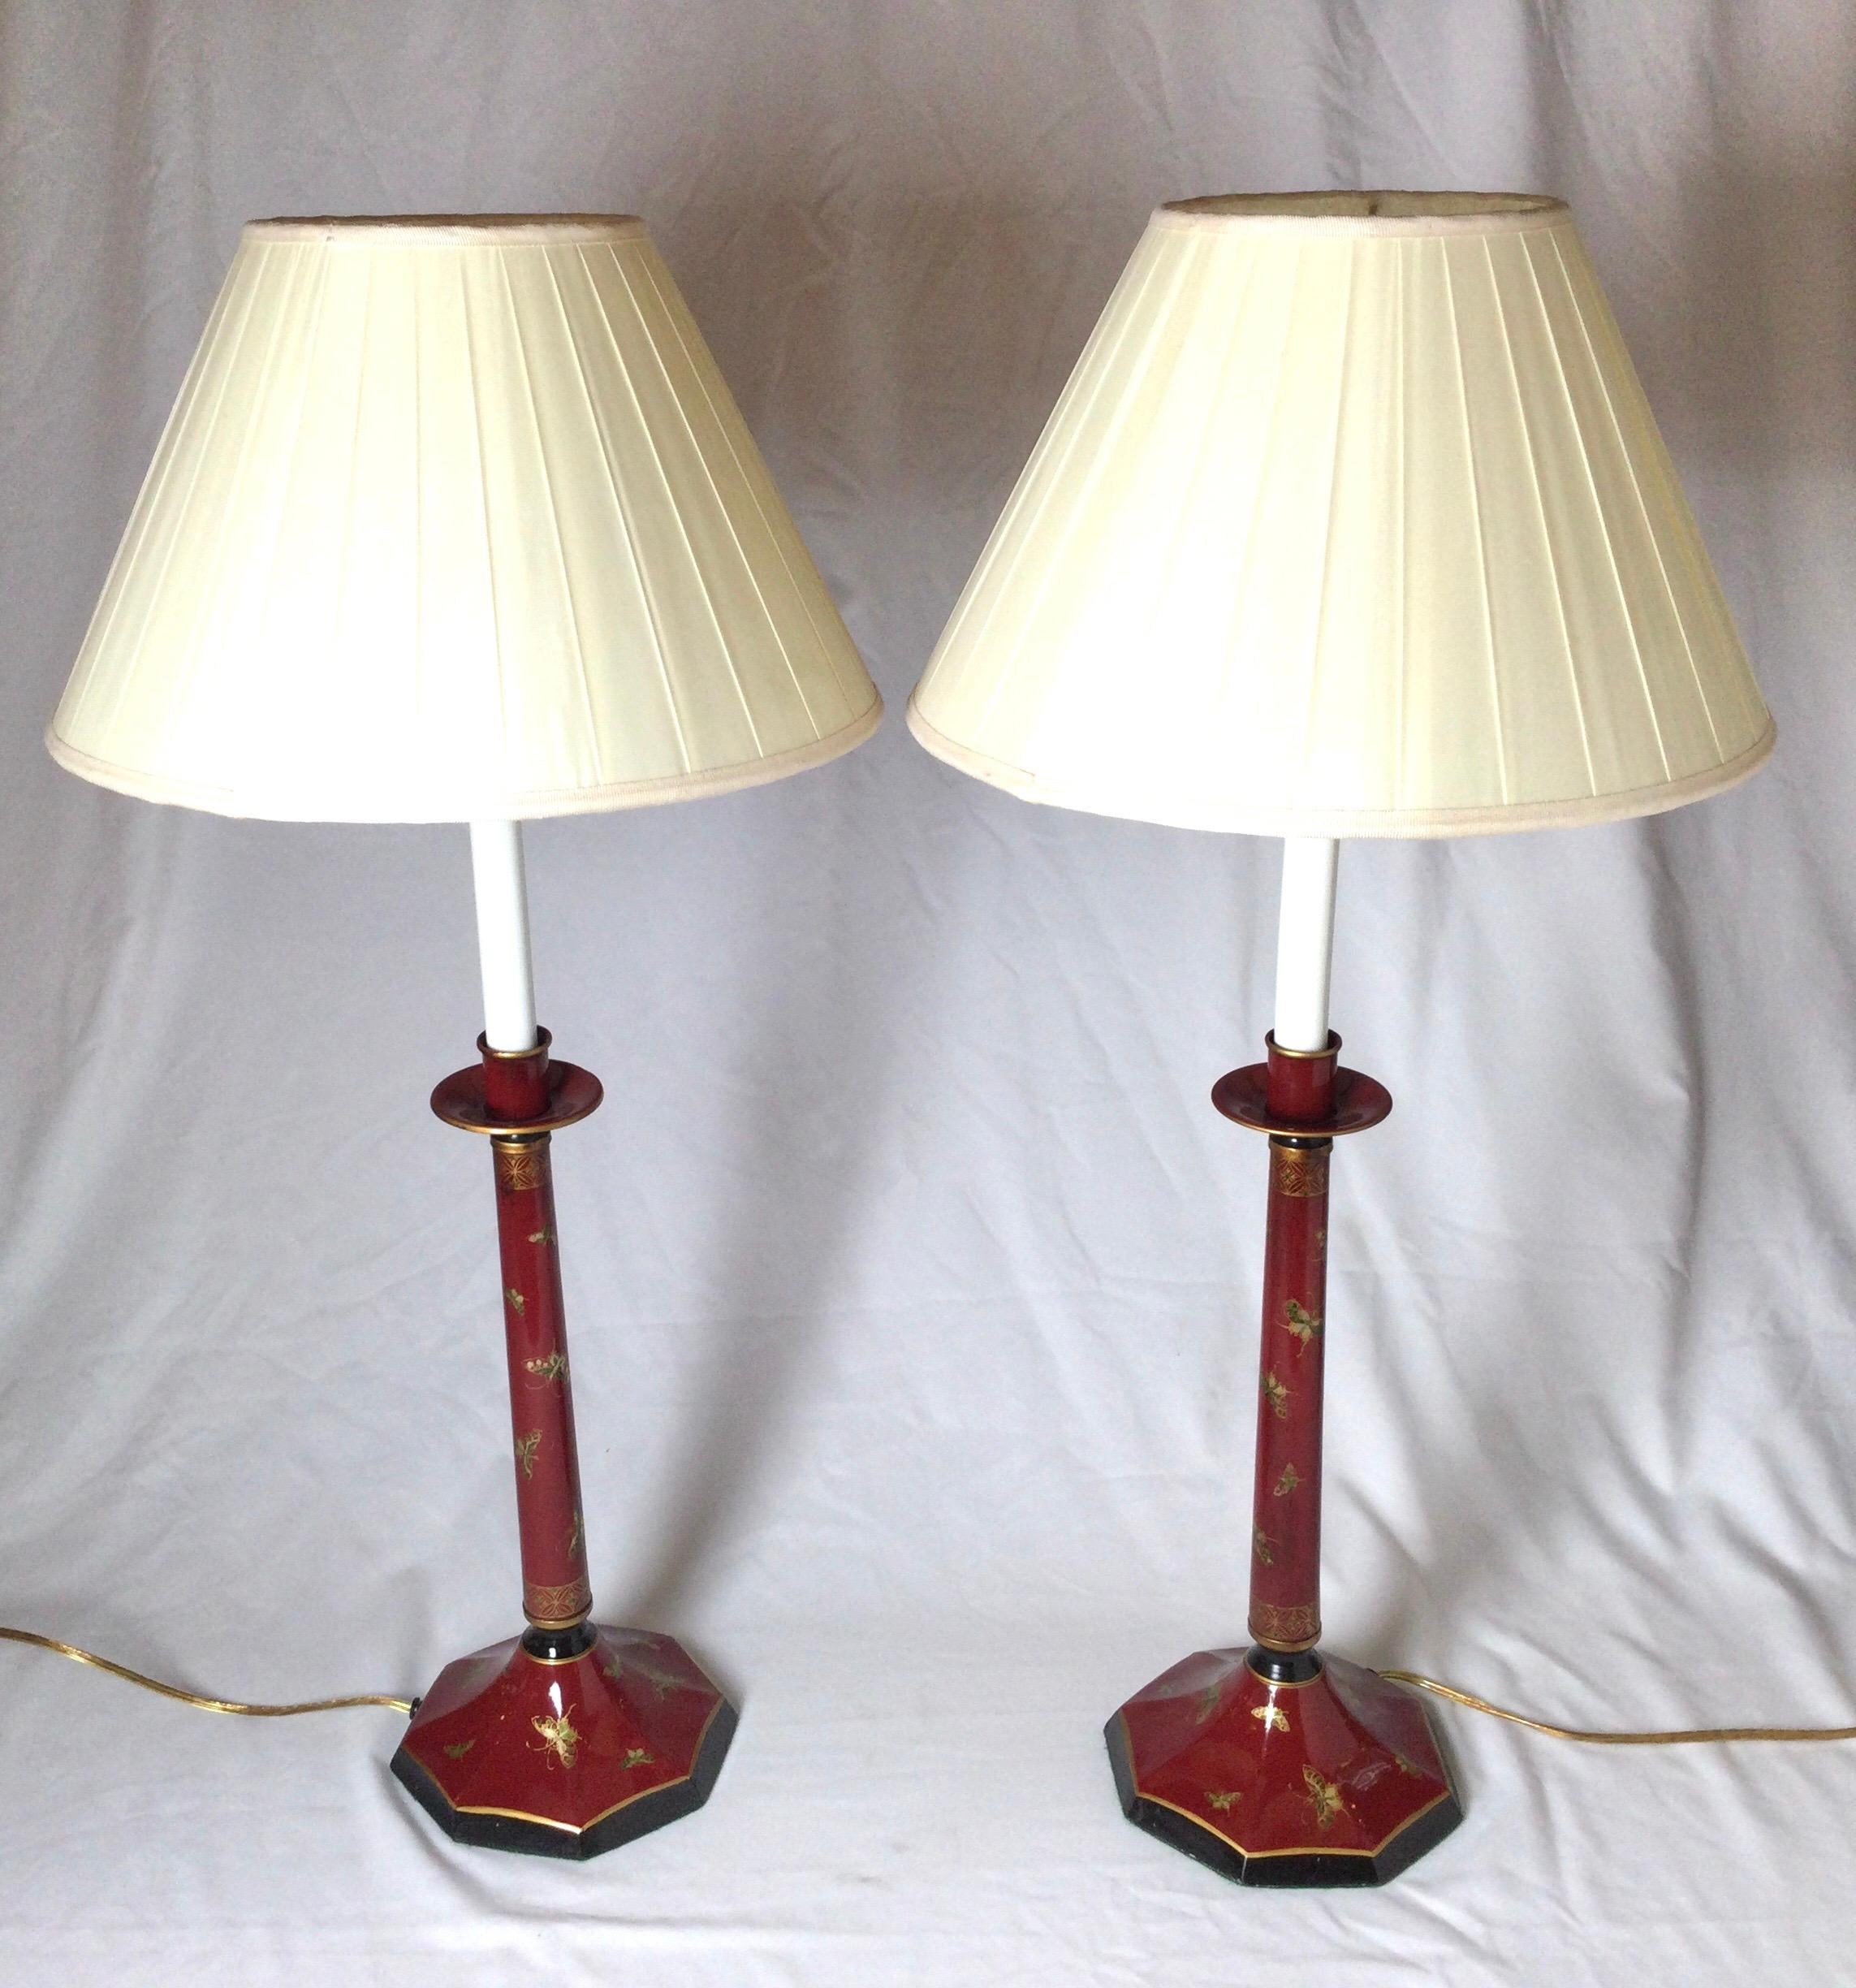 Pair of Chinese red with butterfly tole candlestick buffet lamps by Arrowsmith. 27” to top of finials 23.5 to top of socket 6.25” in diameter. Shades for photo only.